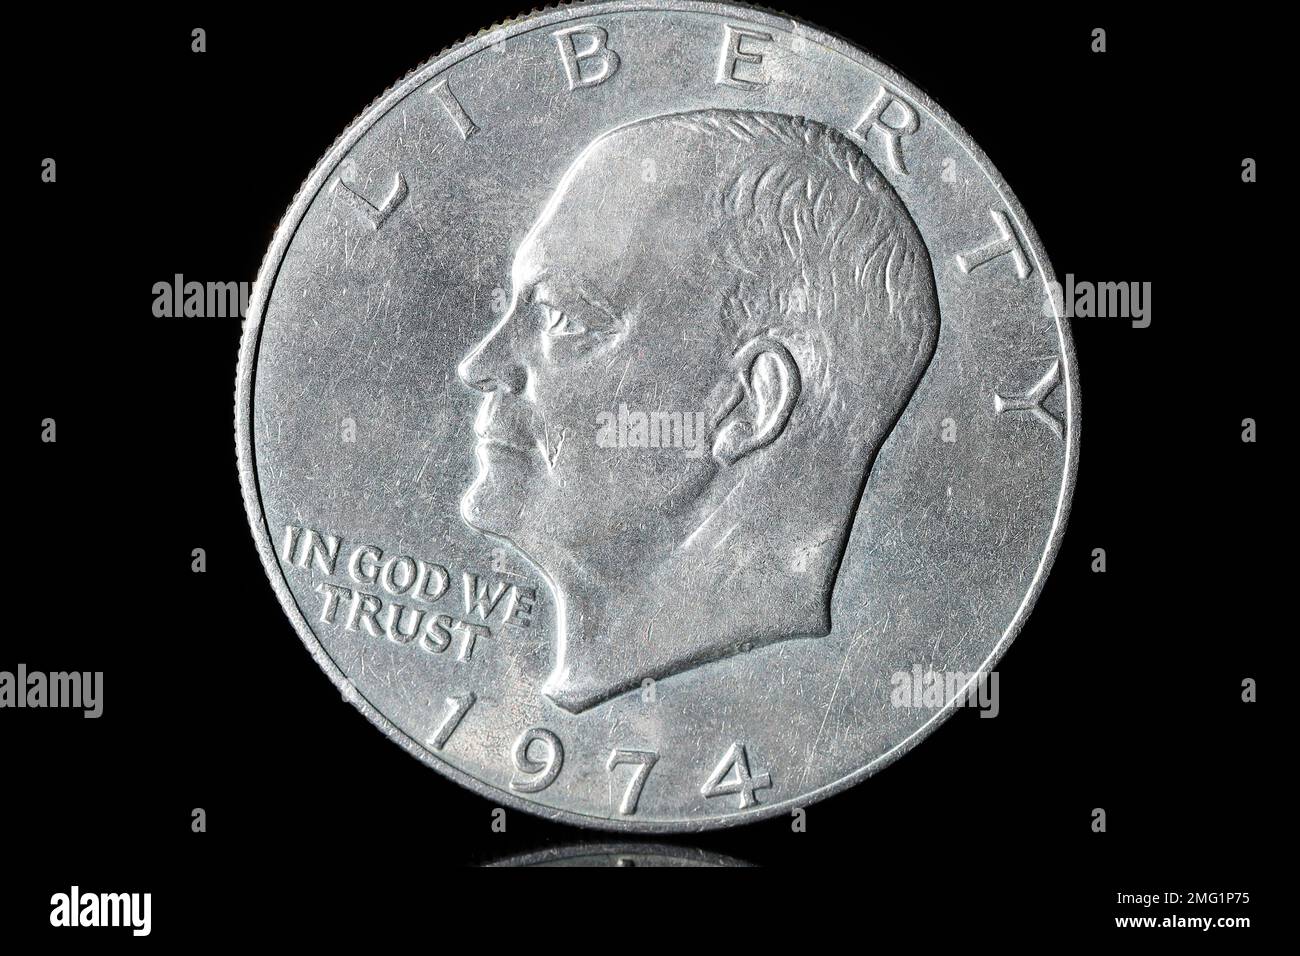 Obverse of a U.S $1 dollar coin issued in 1974.It features President Eisenhower with the word 'Liberty' and the phrase 'In God We Trust' Stock Photo